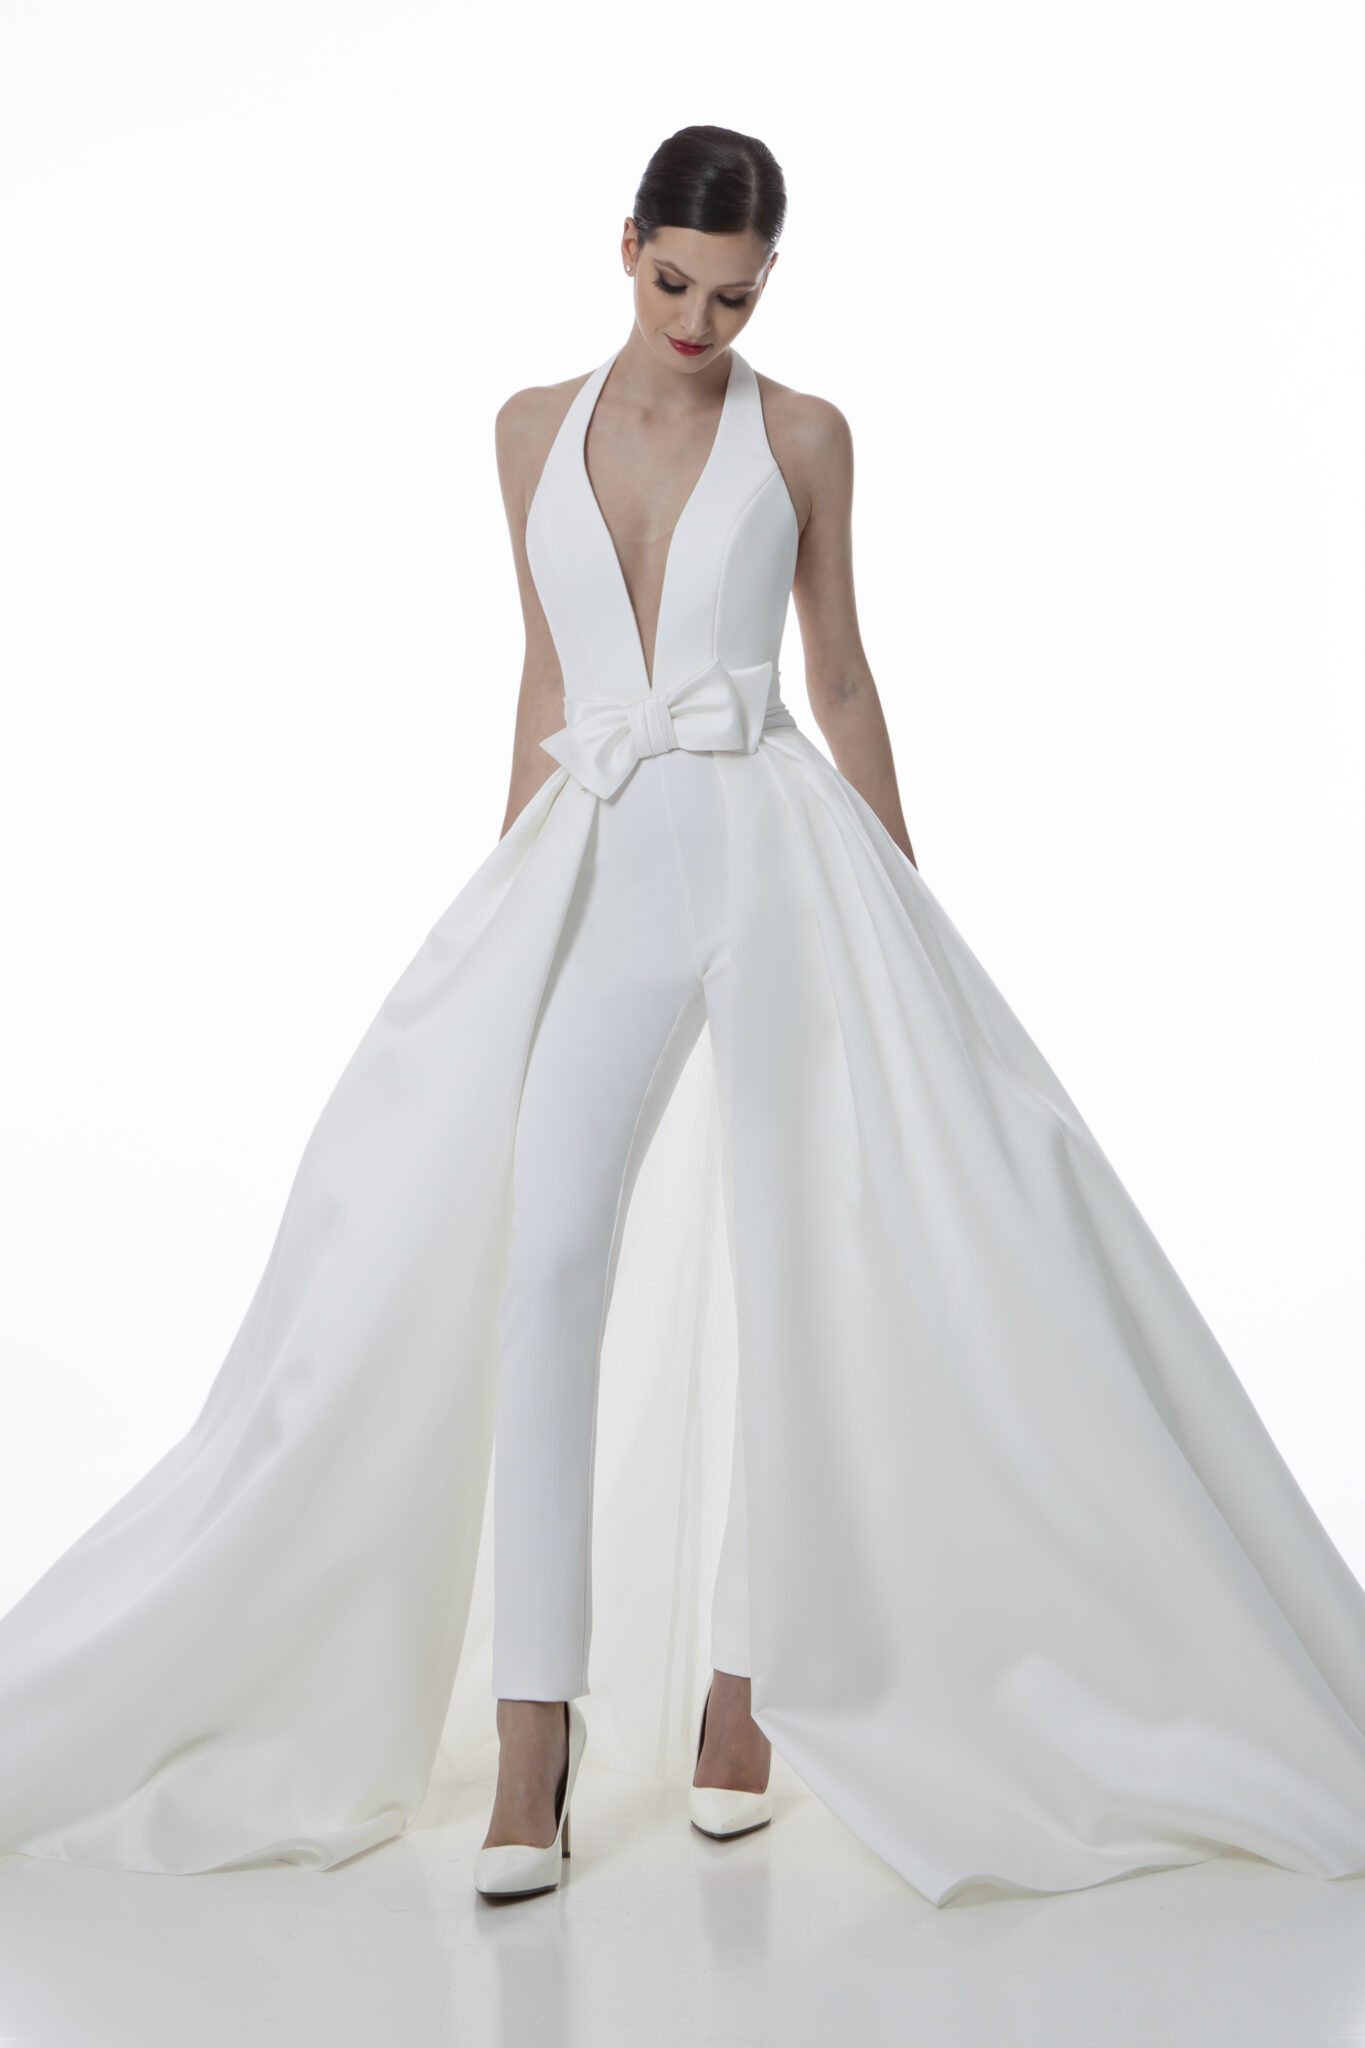 Egò Collection - Made in Italy Bridal Dresses - Valentini Spose